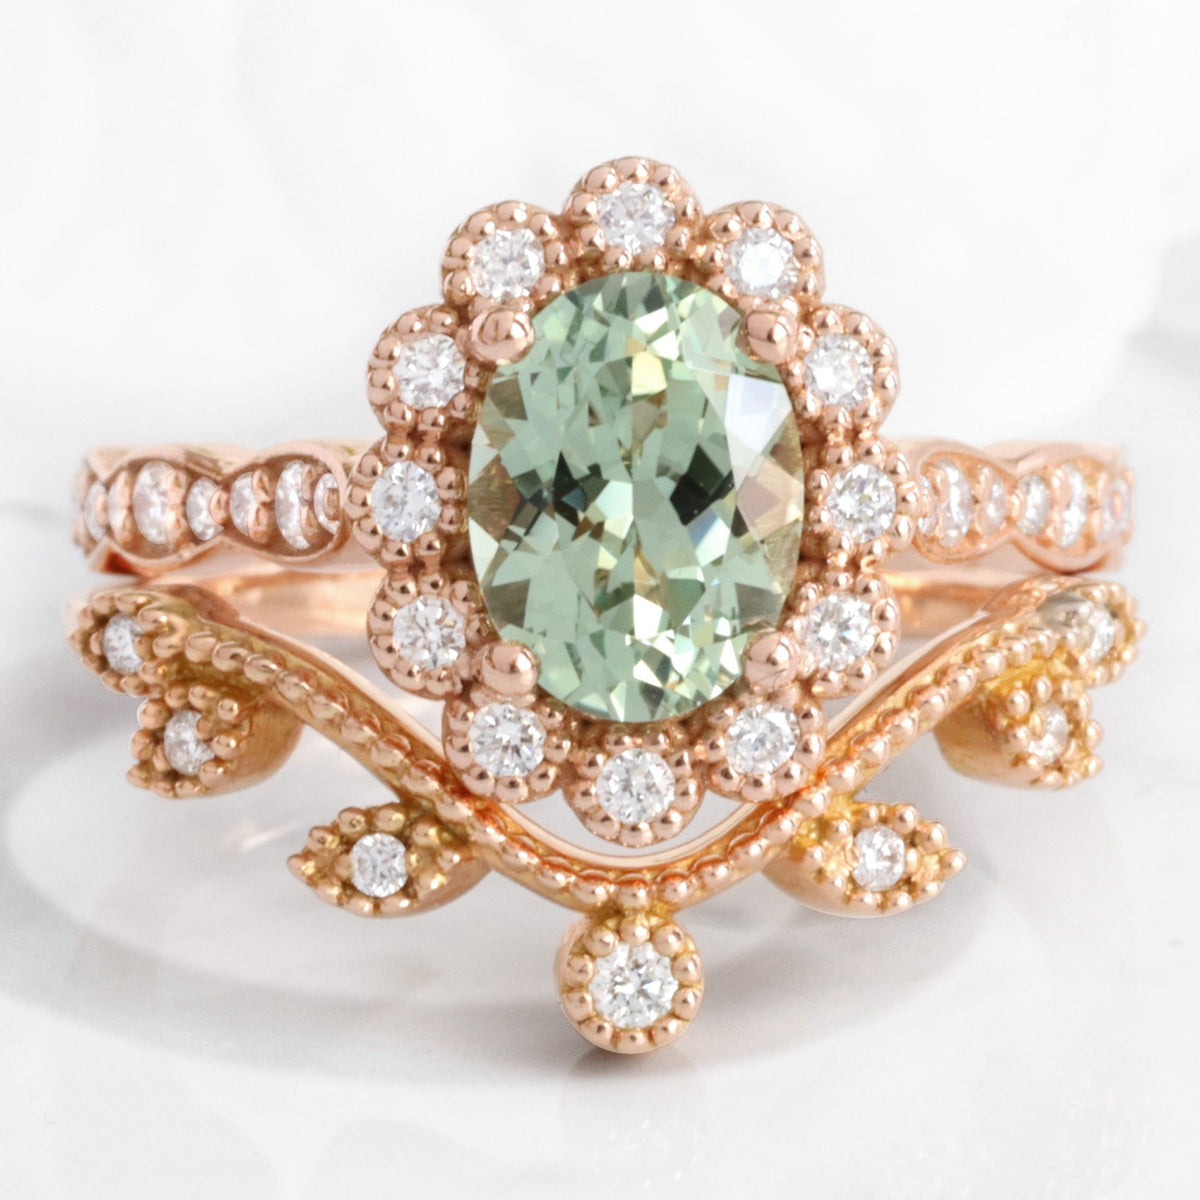 Vintage style green sapphire ring bridal set rose gold curved leaf diamond wedding ring stack la more design jewelry